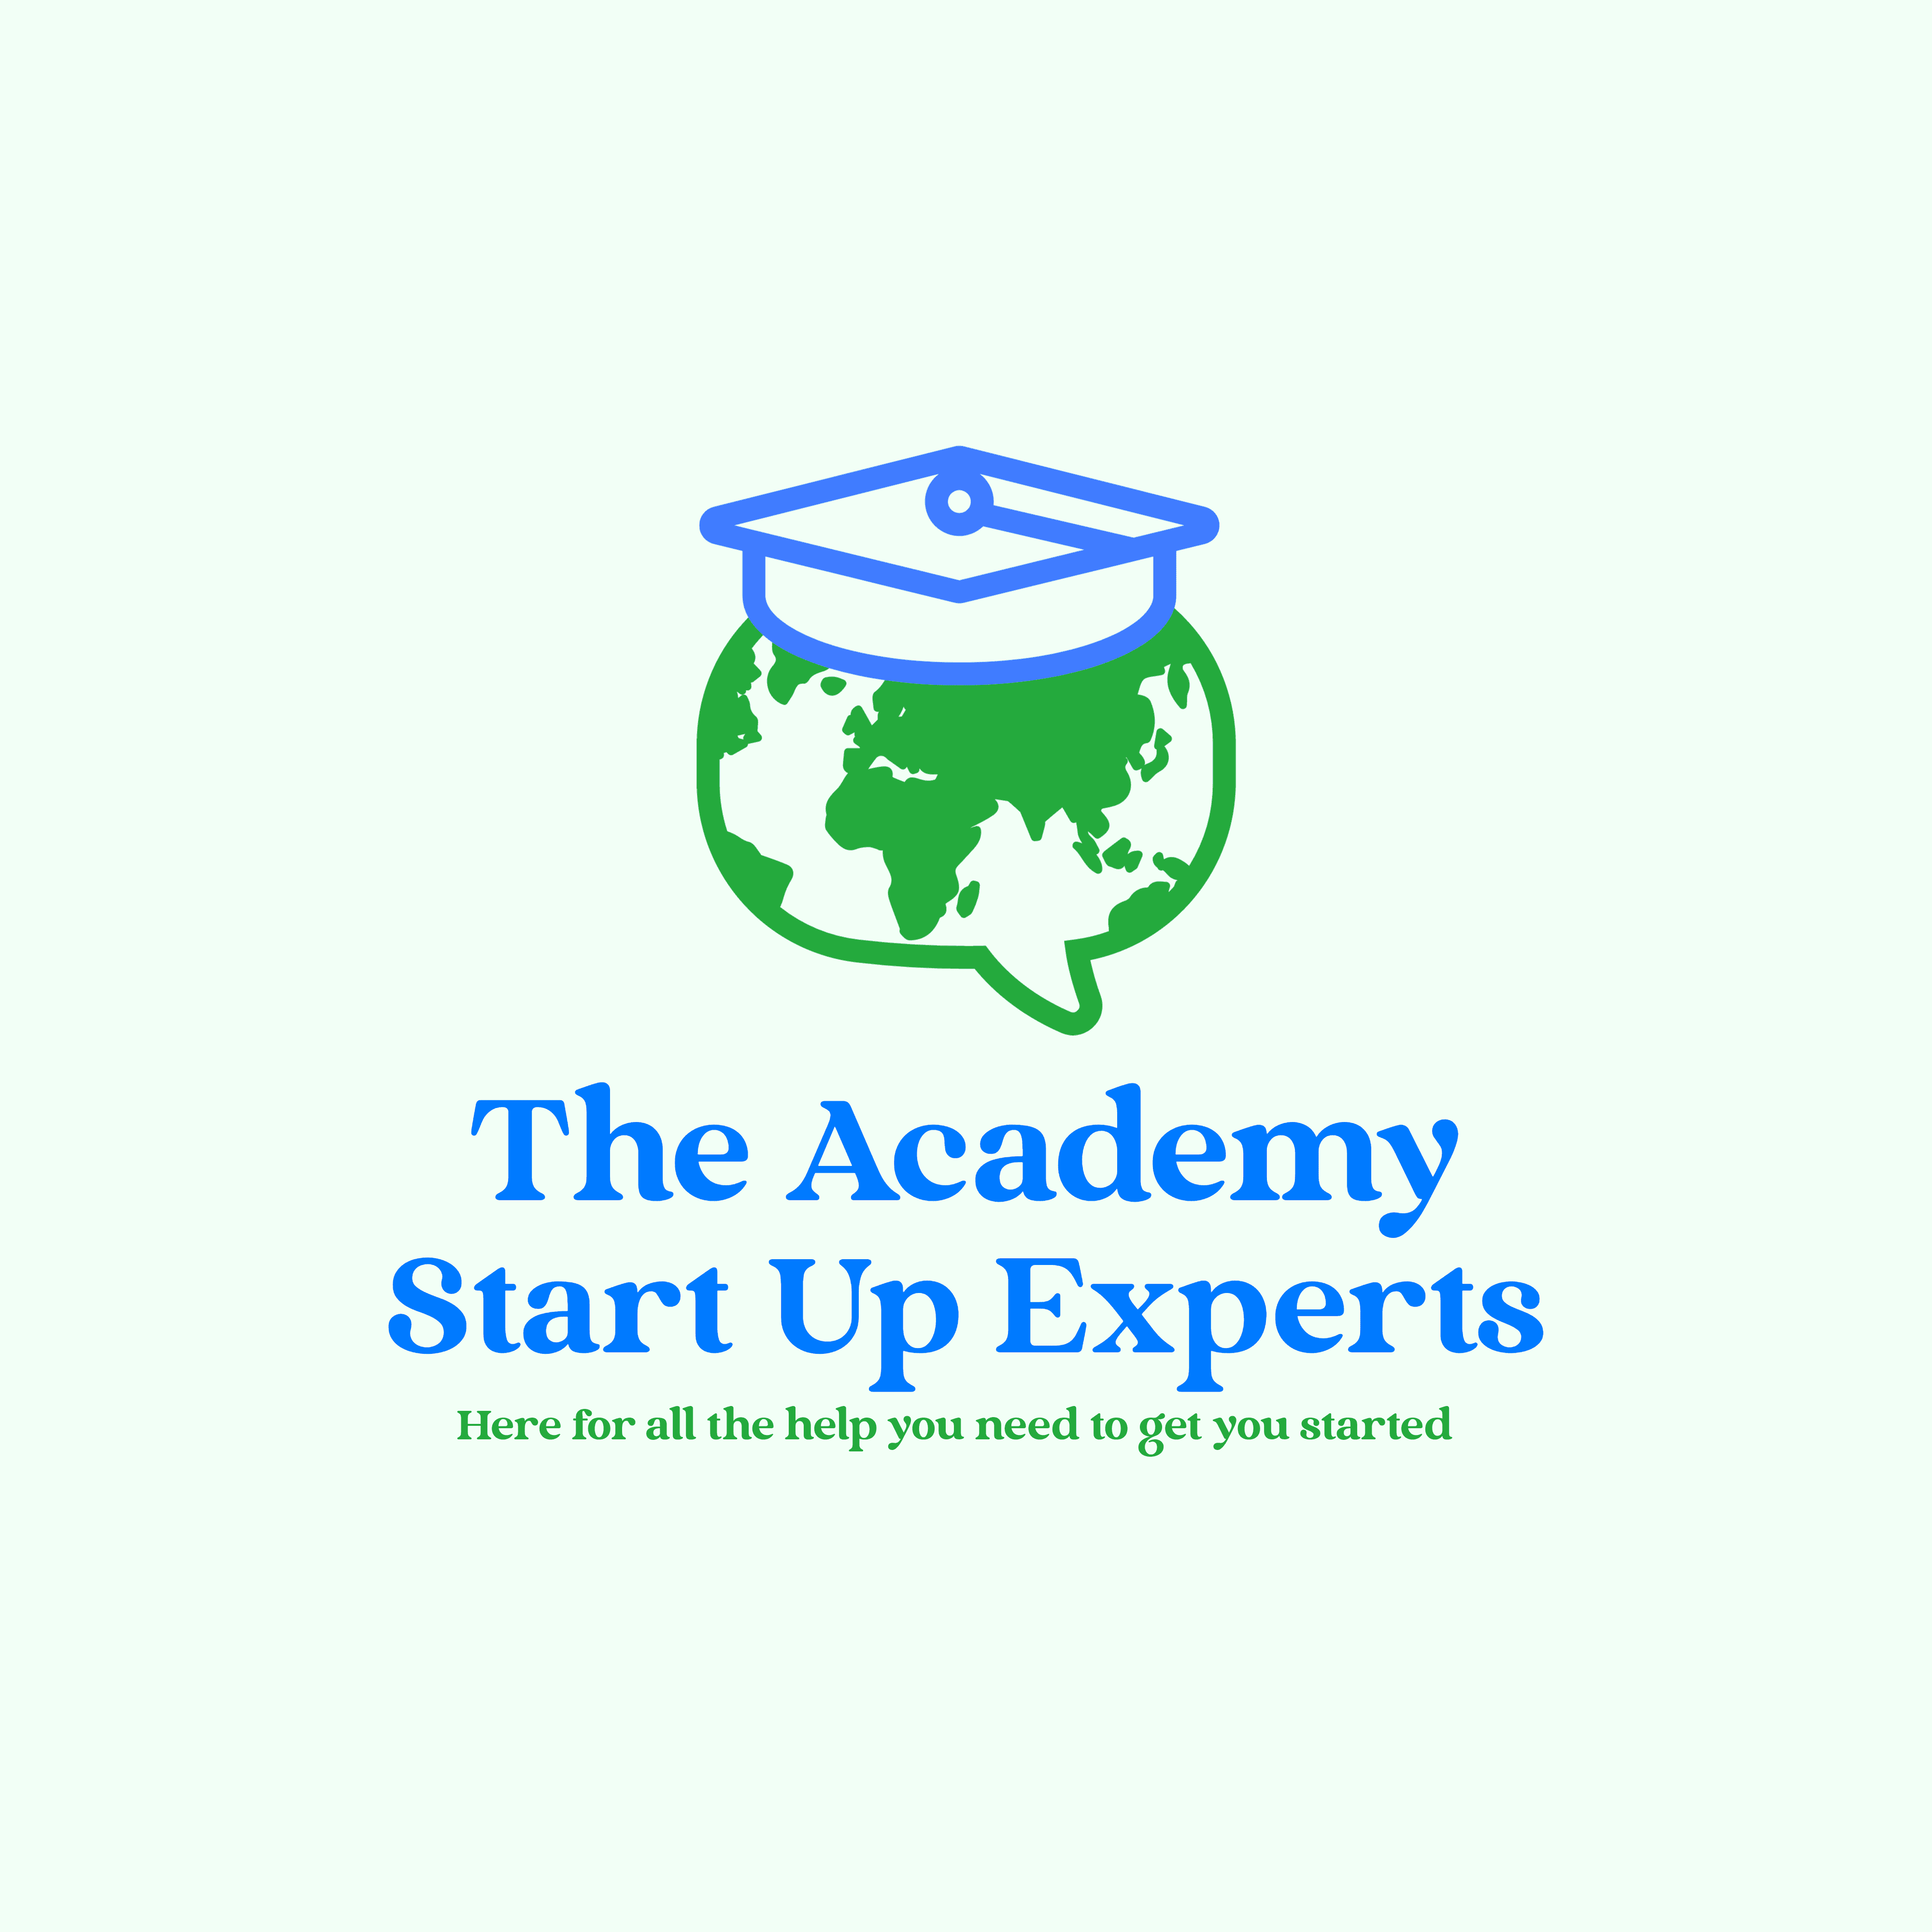 The Academy Start Up Experts